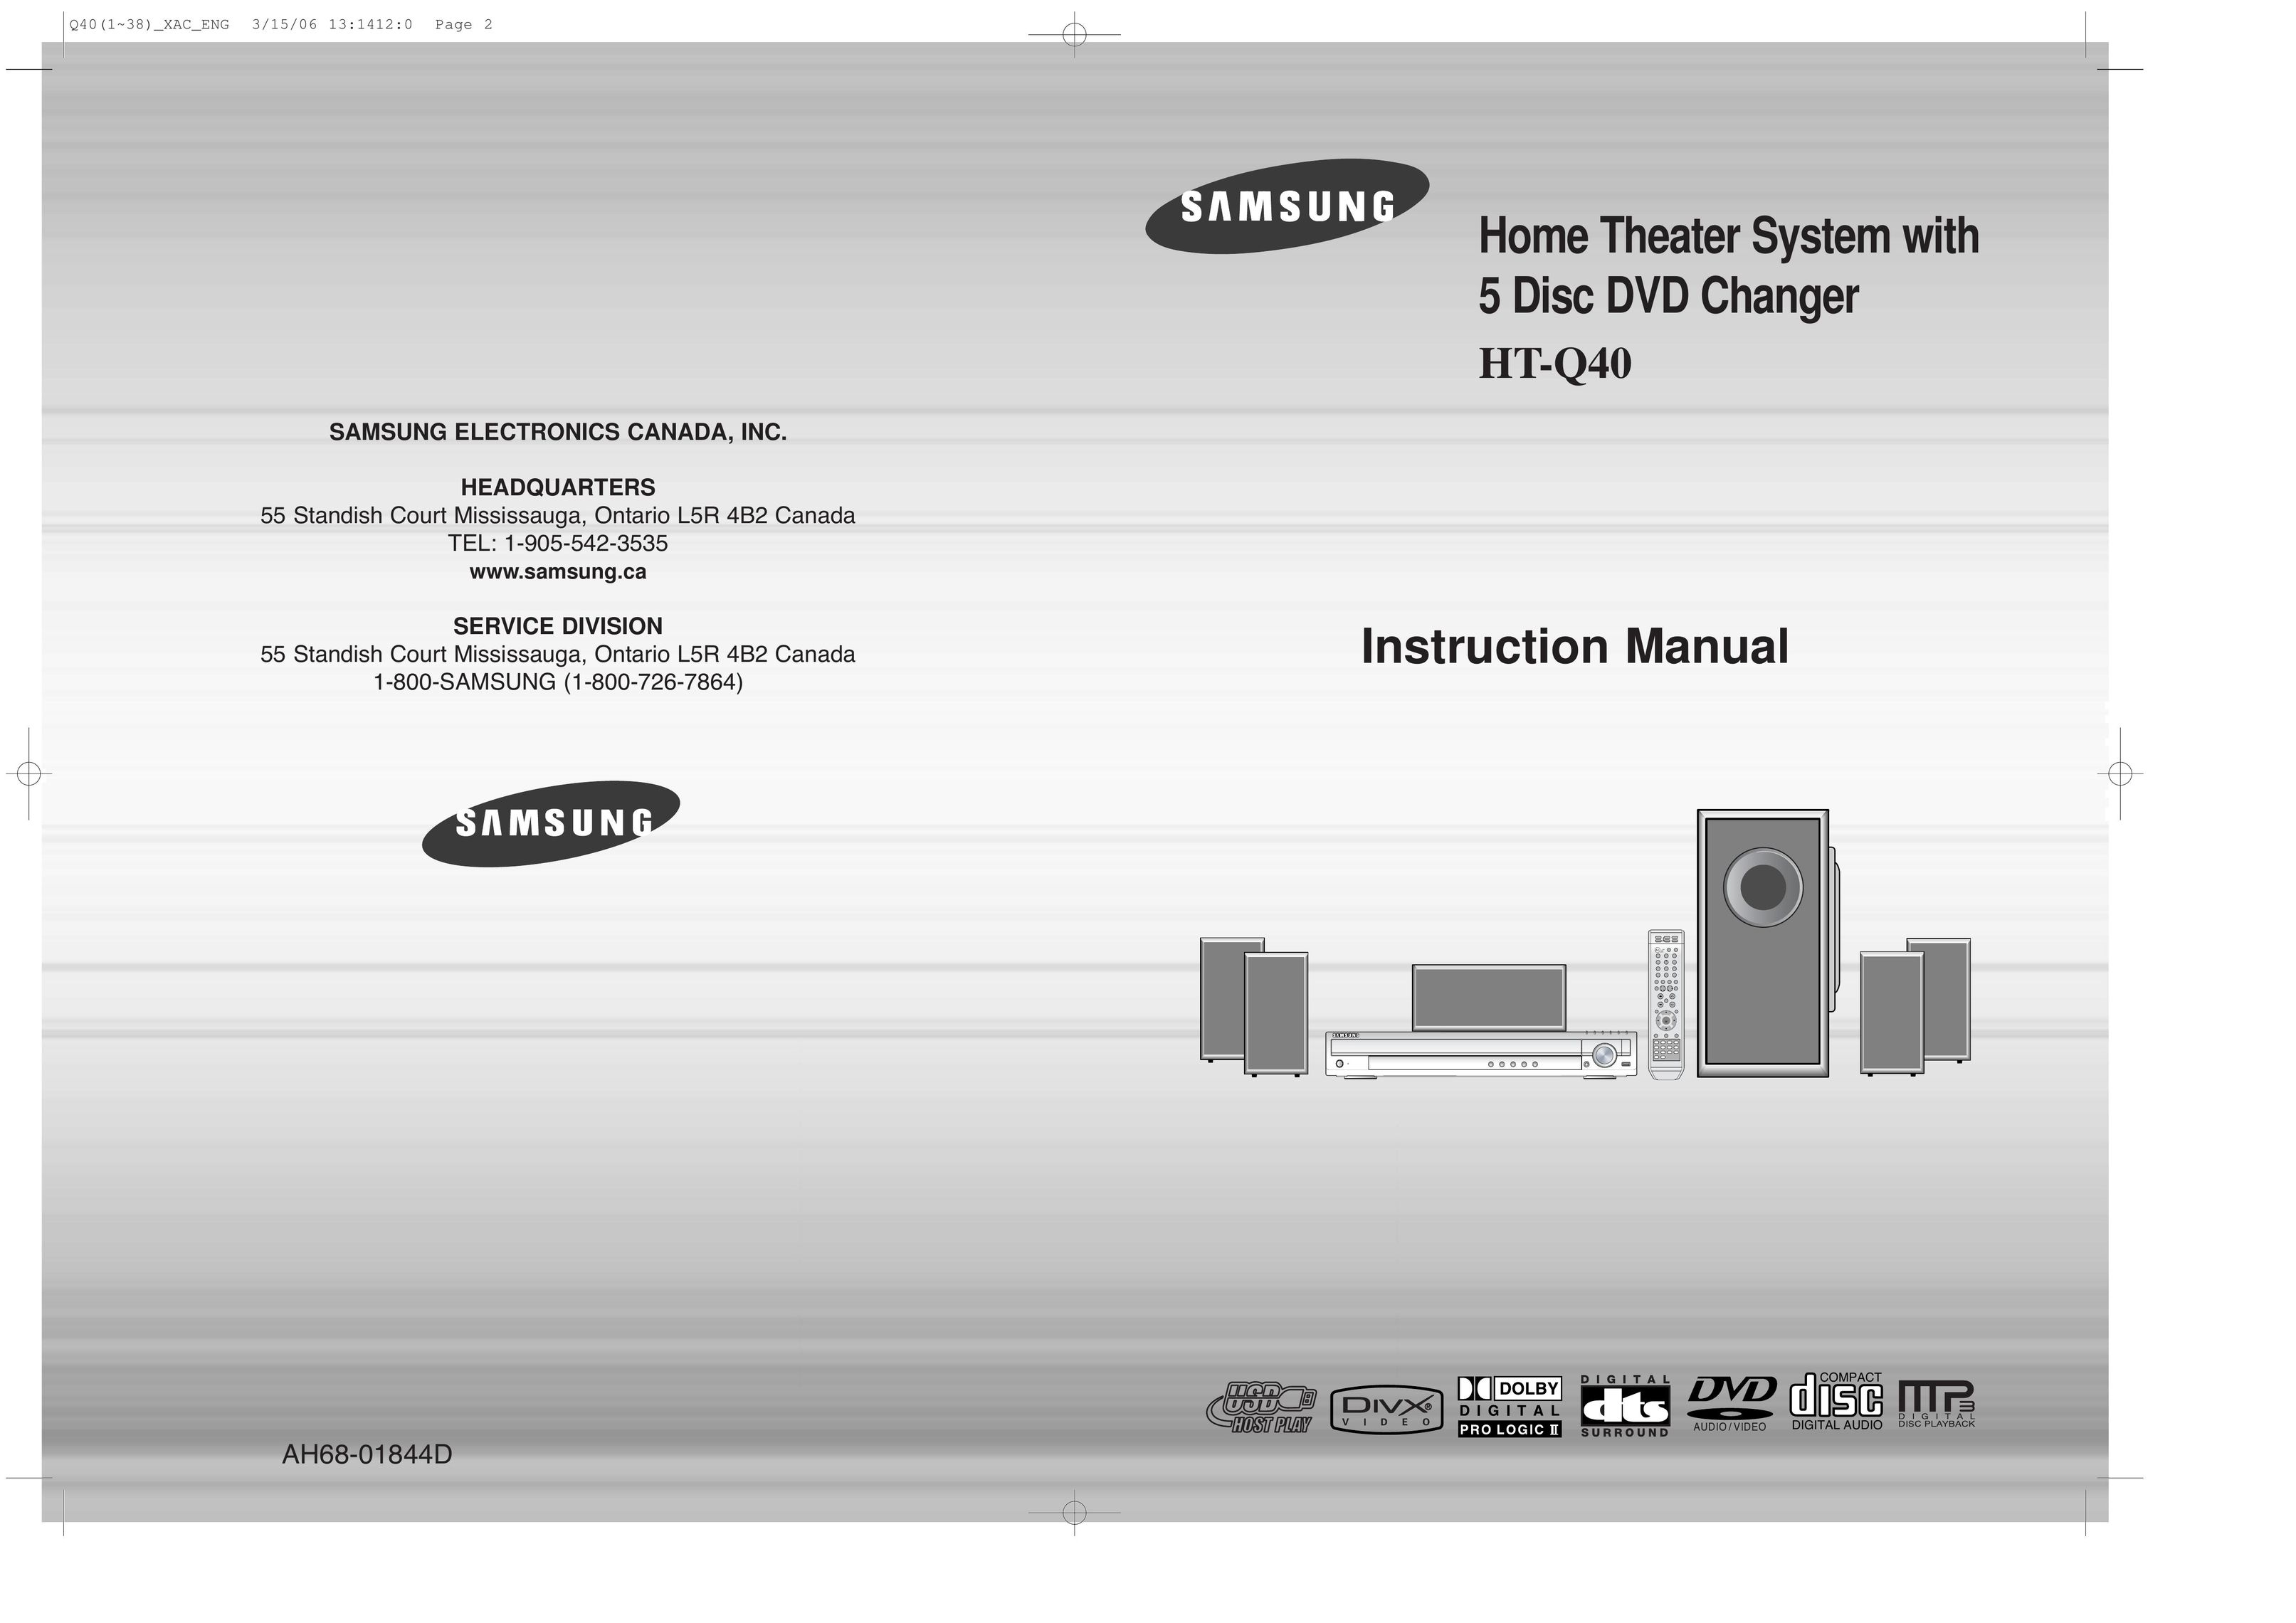 Samsung AH68-01844D Home Theater System User Manual